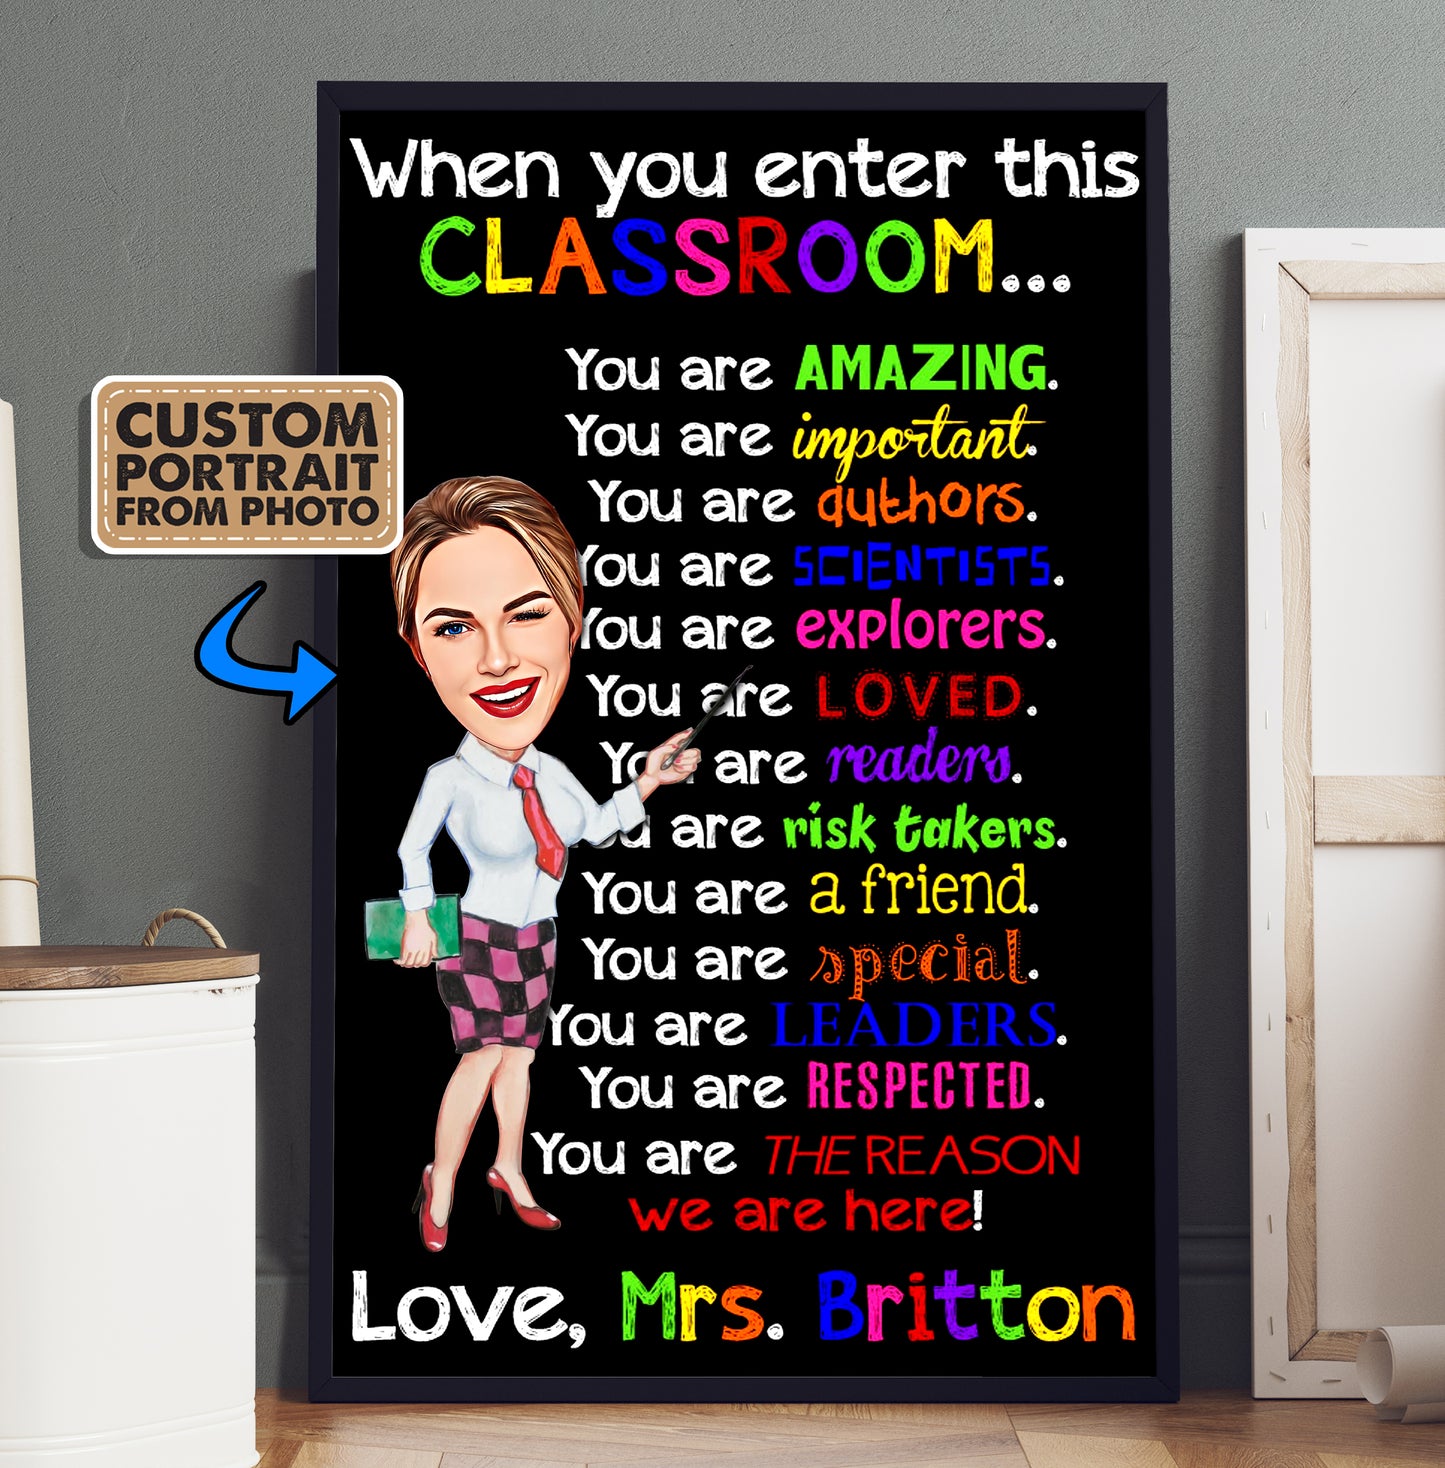 When you enter this Classroom You are Amazing - Custom Name Teacher Poster Canvas - Custom Cartoon Portrait From Your Photo - Back To School